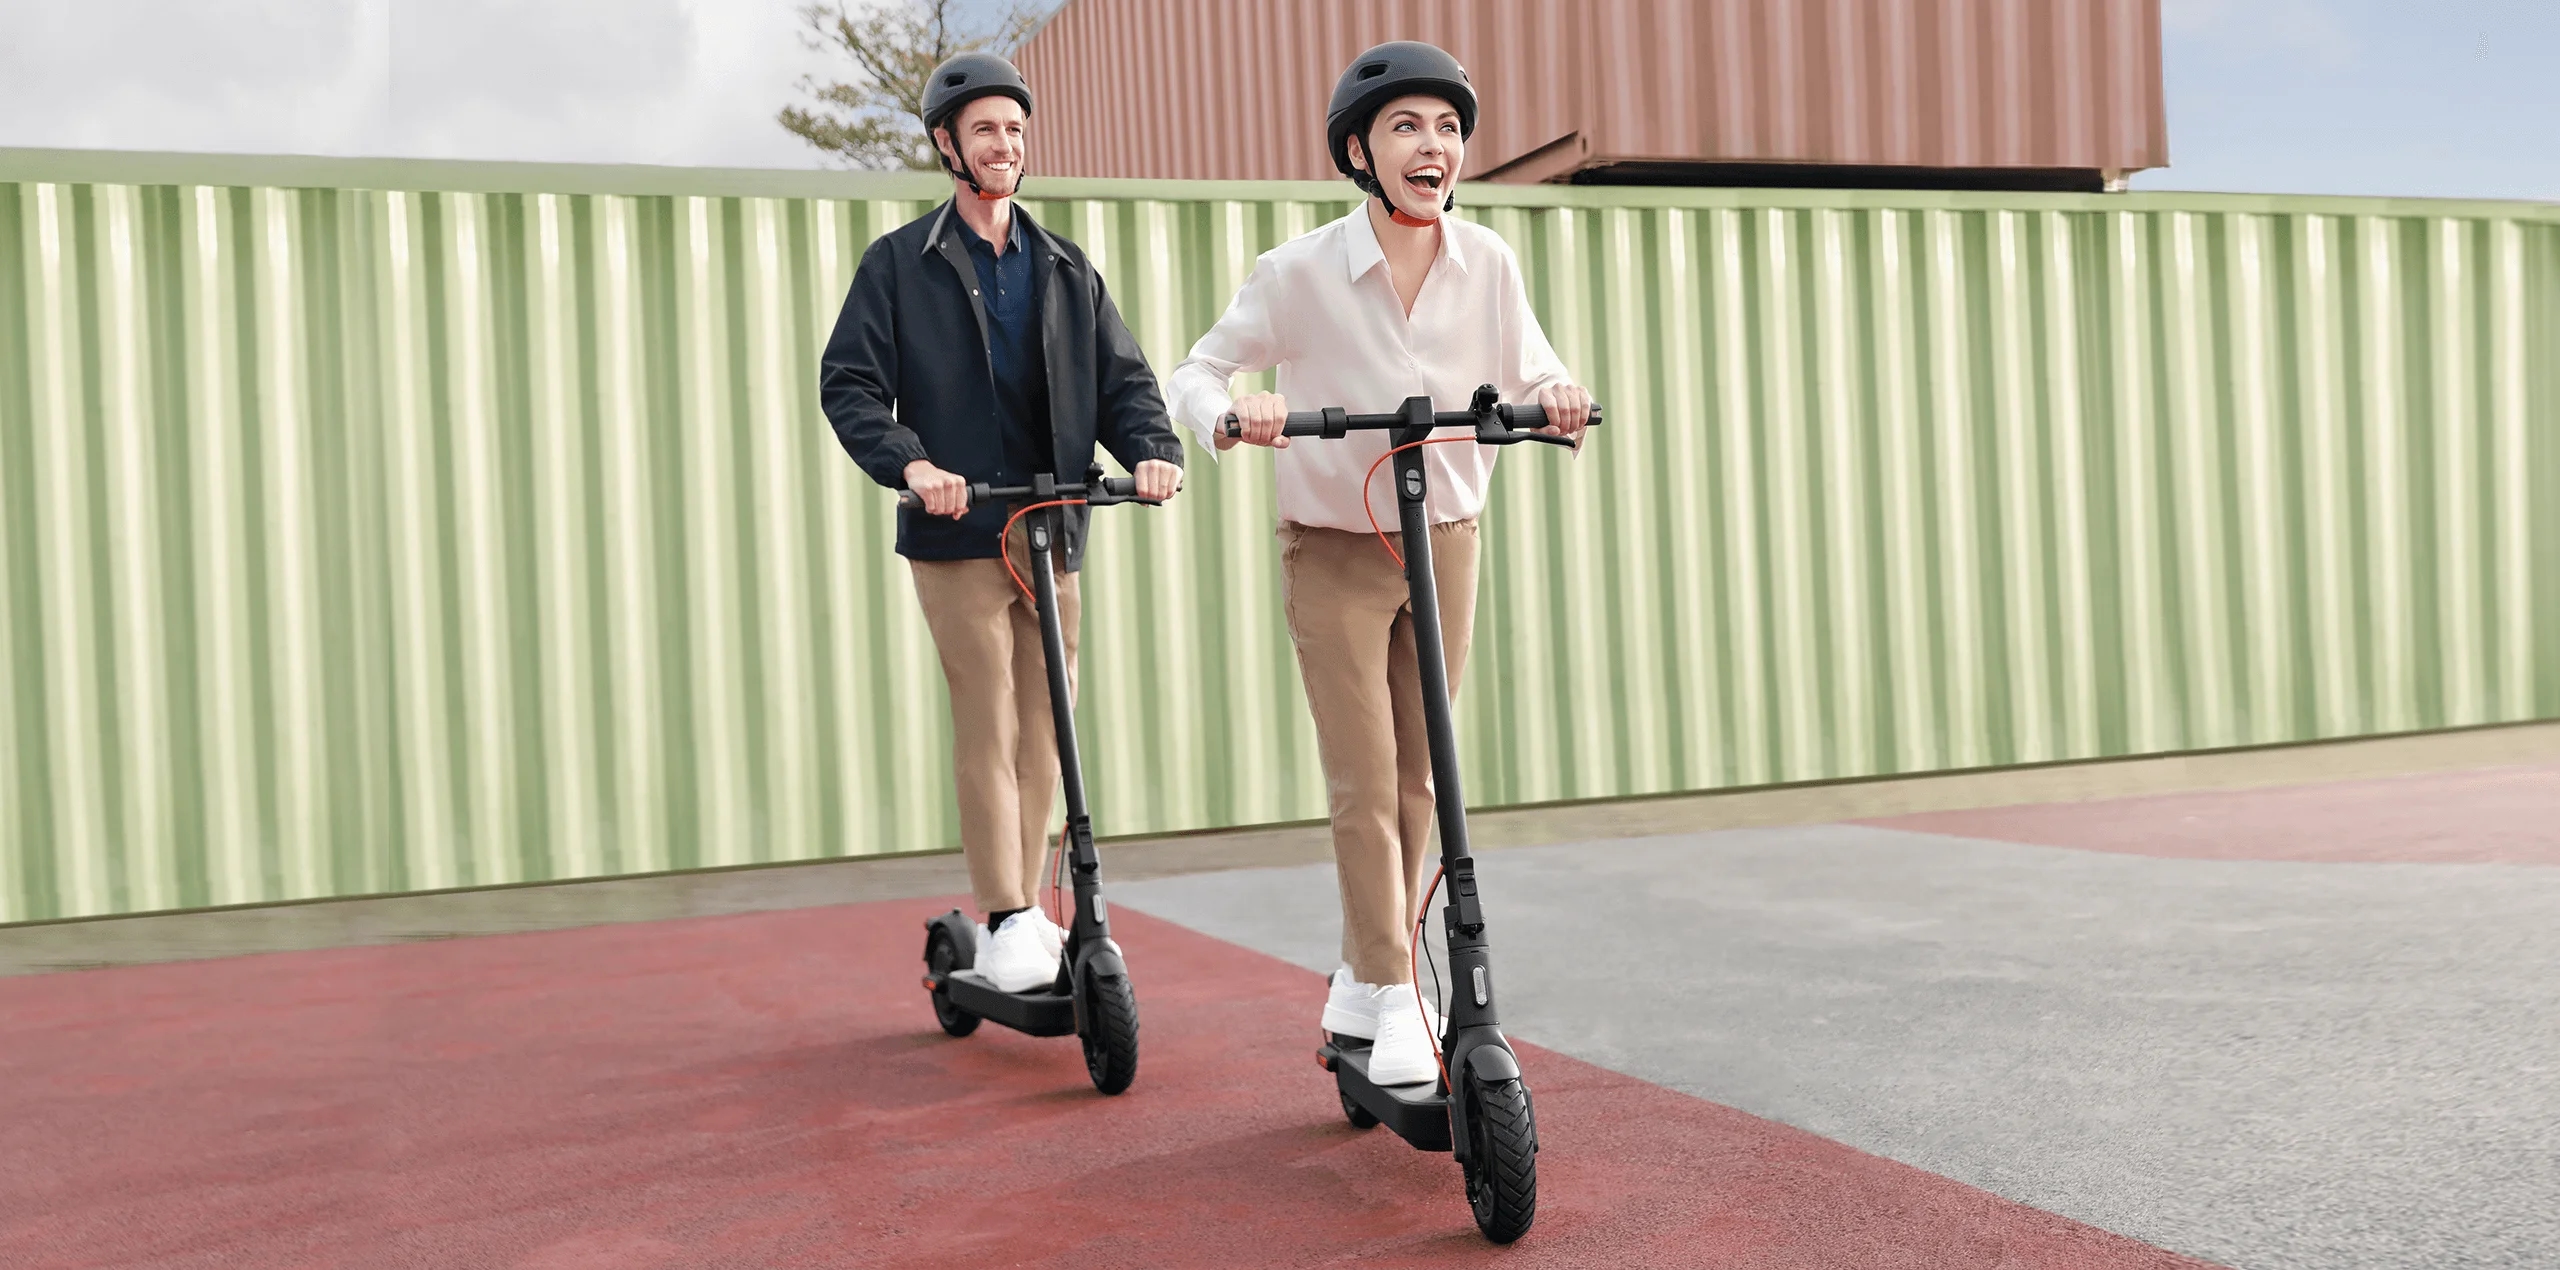 Xiaomi Electric Scooter 4 Pro (2nd Gen) with a range of up to 60km is already available to buy in Europe